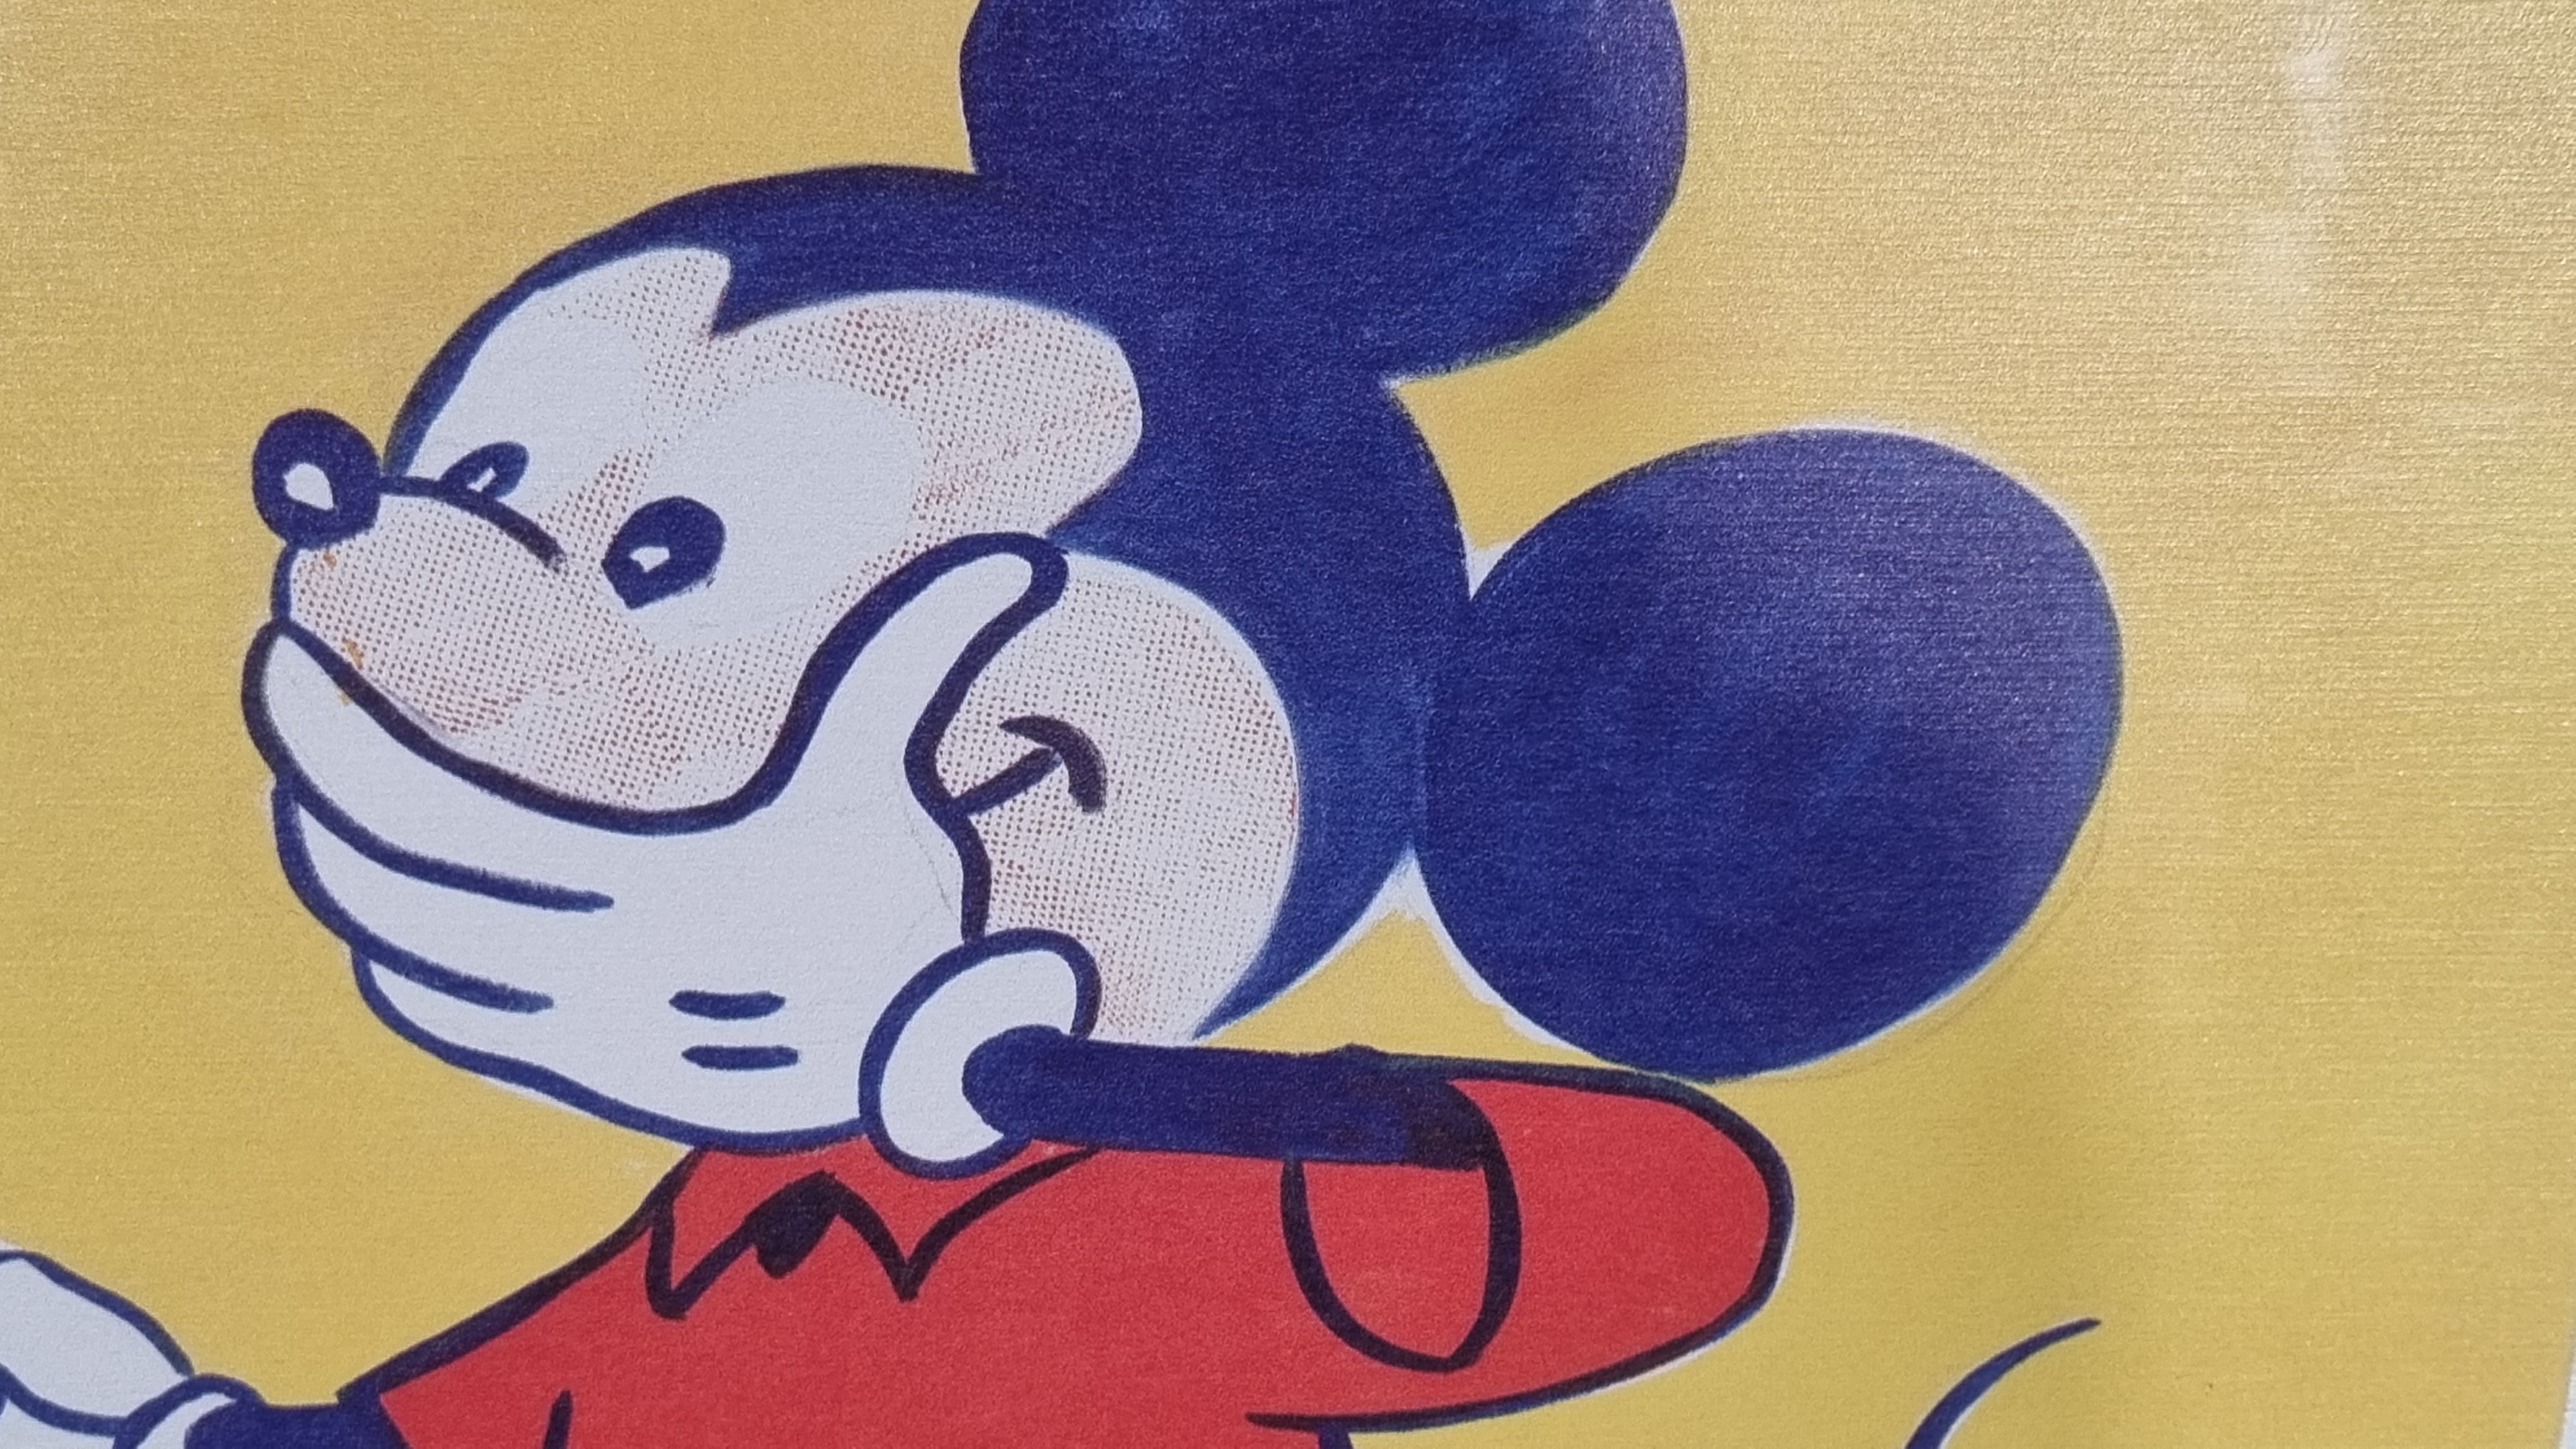 Rare Roy Lichtenstein "Look Mickey, 1961" Limited Edition on Metal. - Image 5 of 9